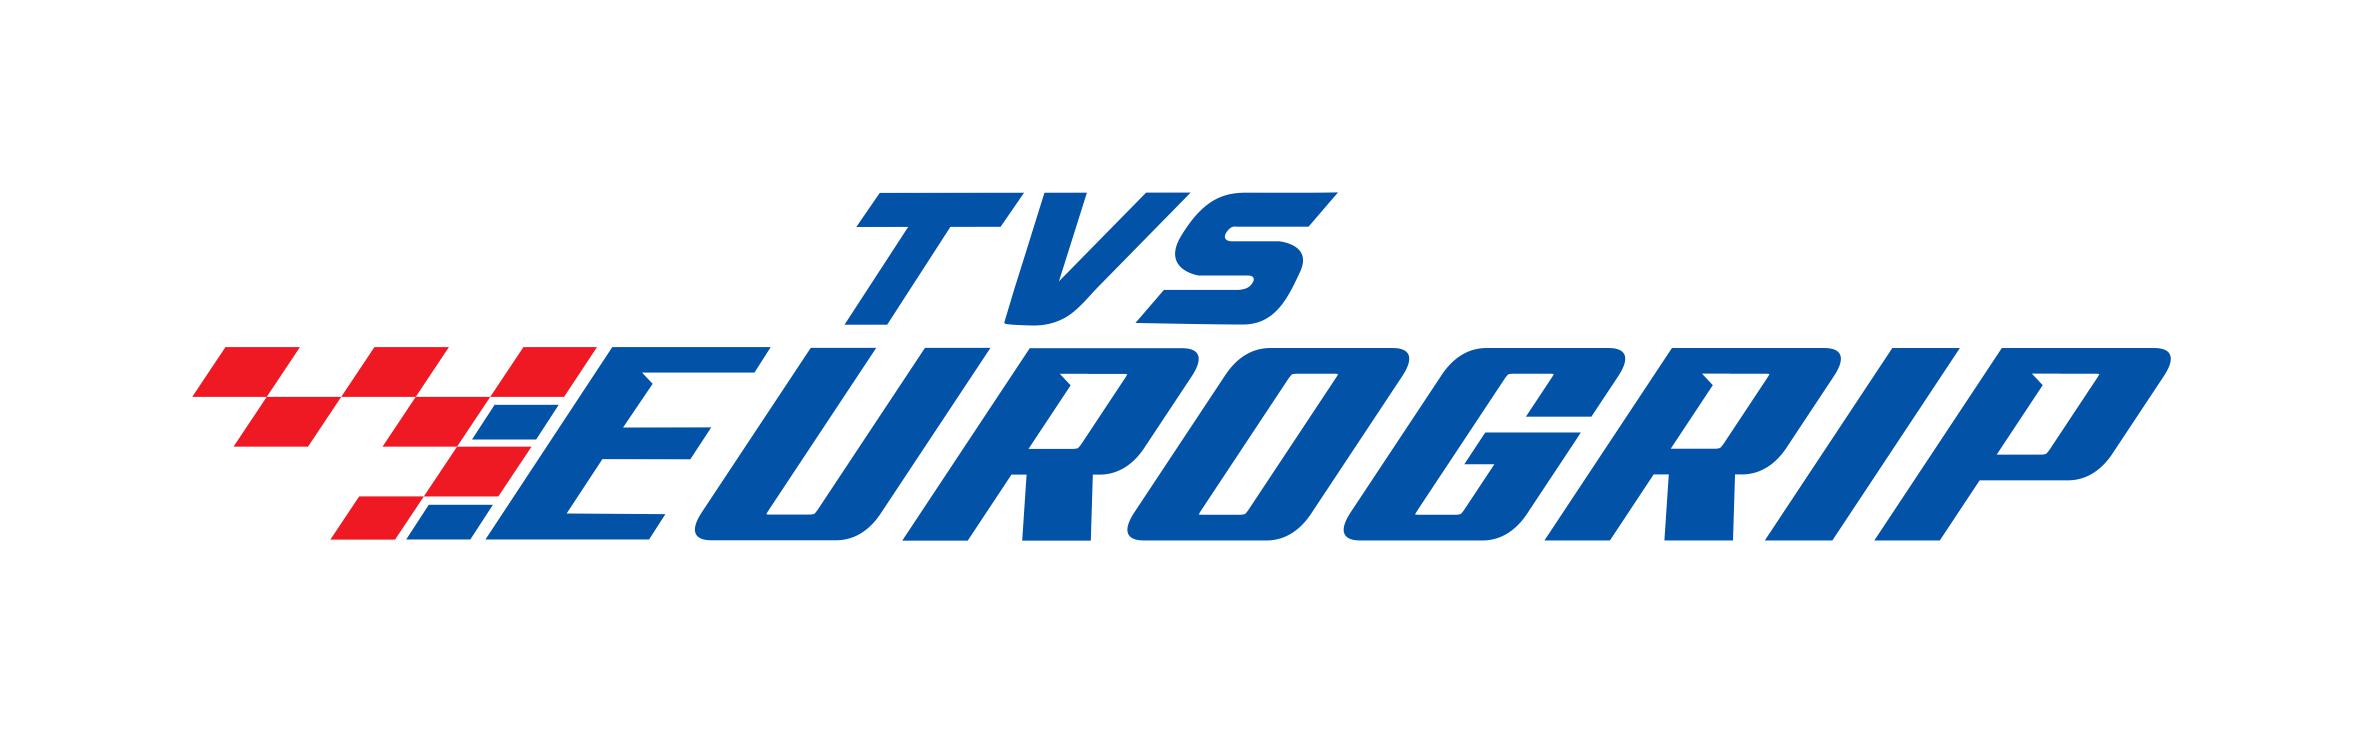 TVS Eurogrip Tyres is ‘Technical Partner’ for TVS One Make Championship 2021